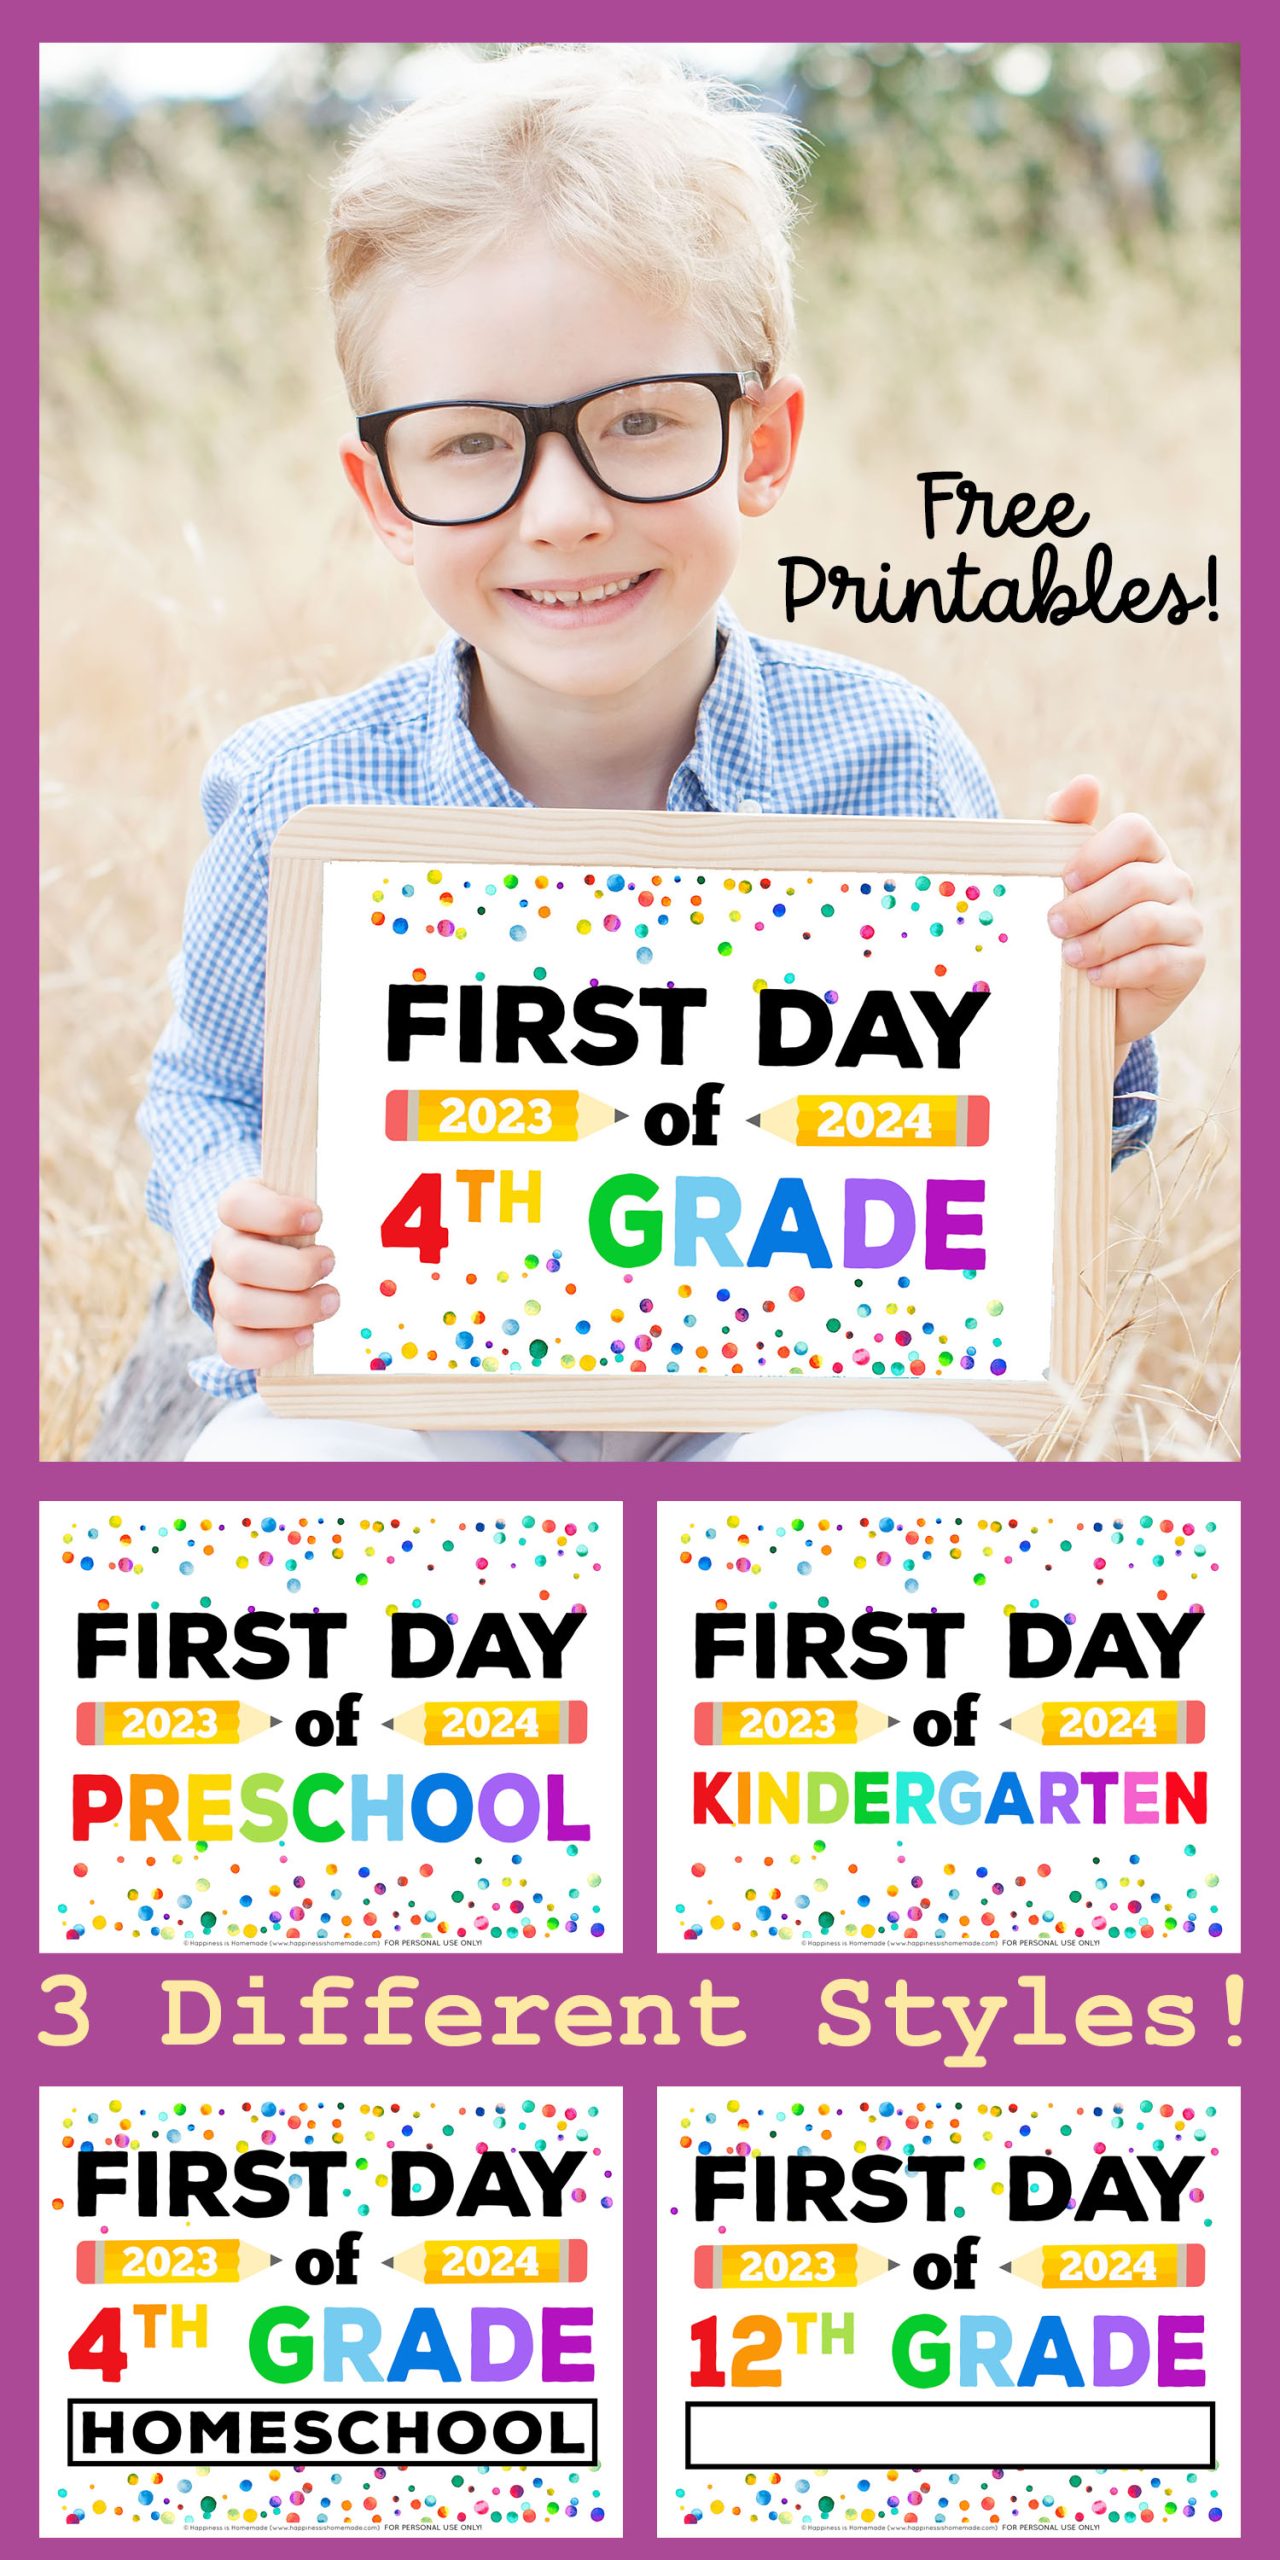 20 Best First Day of School Sign Ideas in 2023